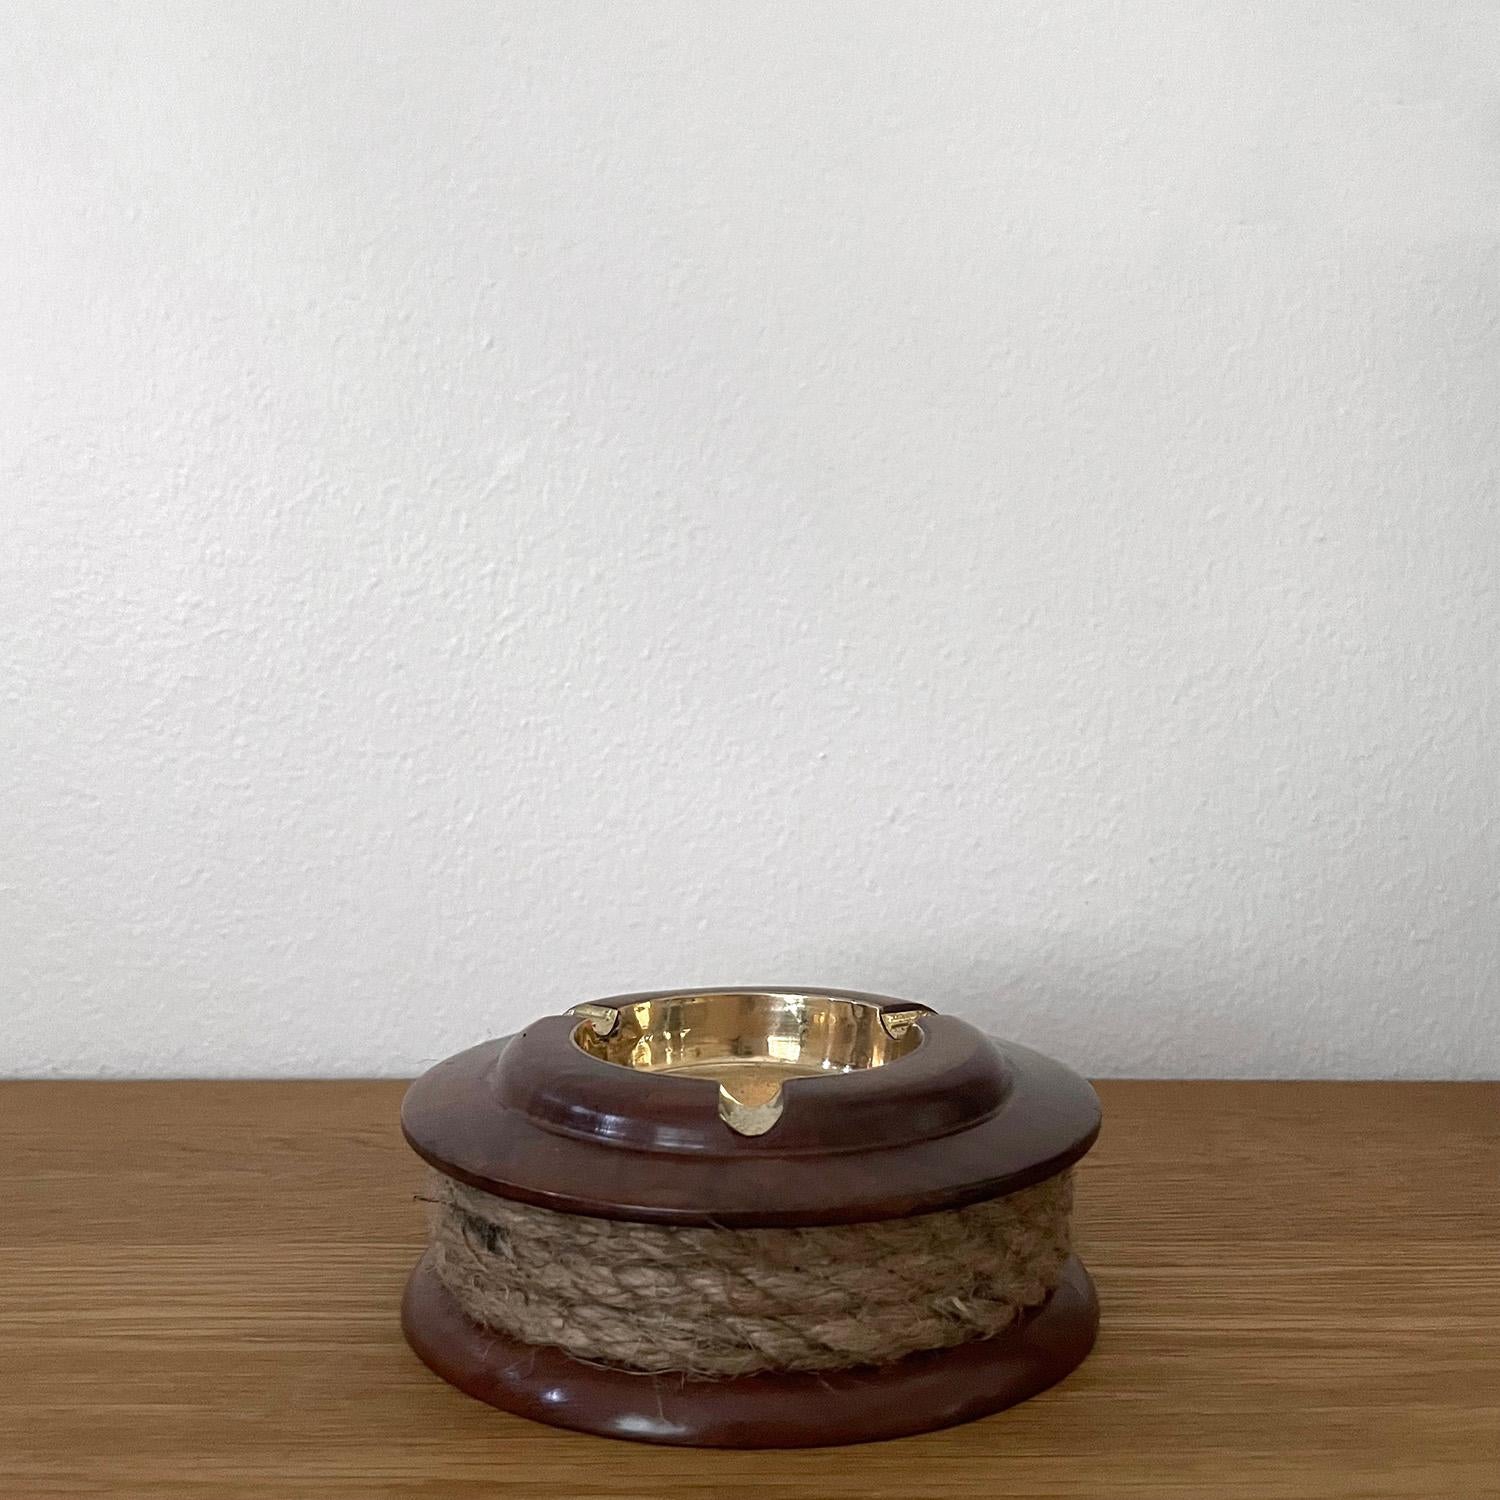 Italian wood & brass ashtray
Italy, circa 1950s
This charming piece will be a great addition to any surface
Twisted rope band encompasses the sculpted wood & aged brass ashtray
Light surface markings 
Patina from age and use 
This listing is for a